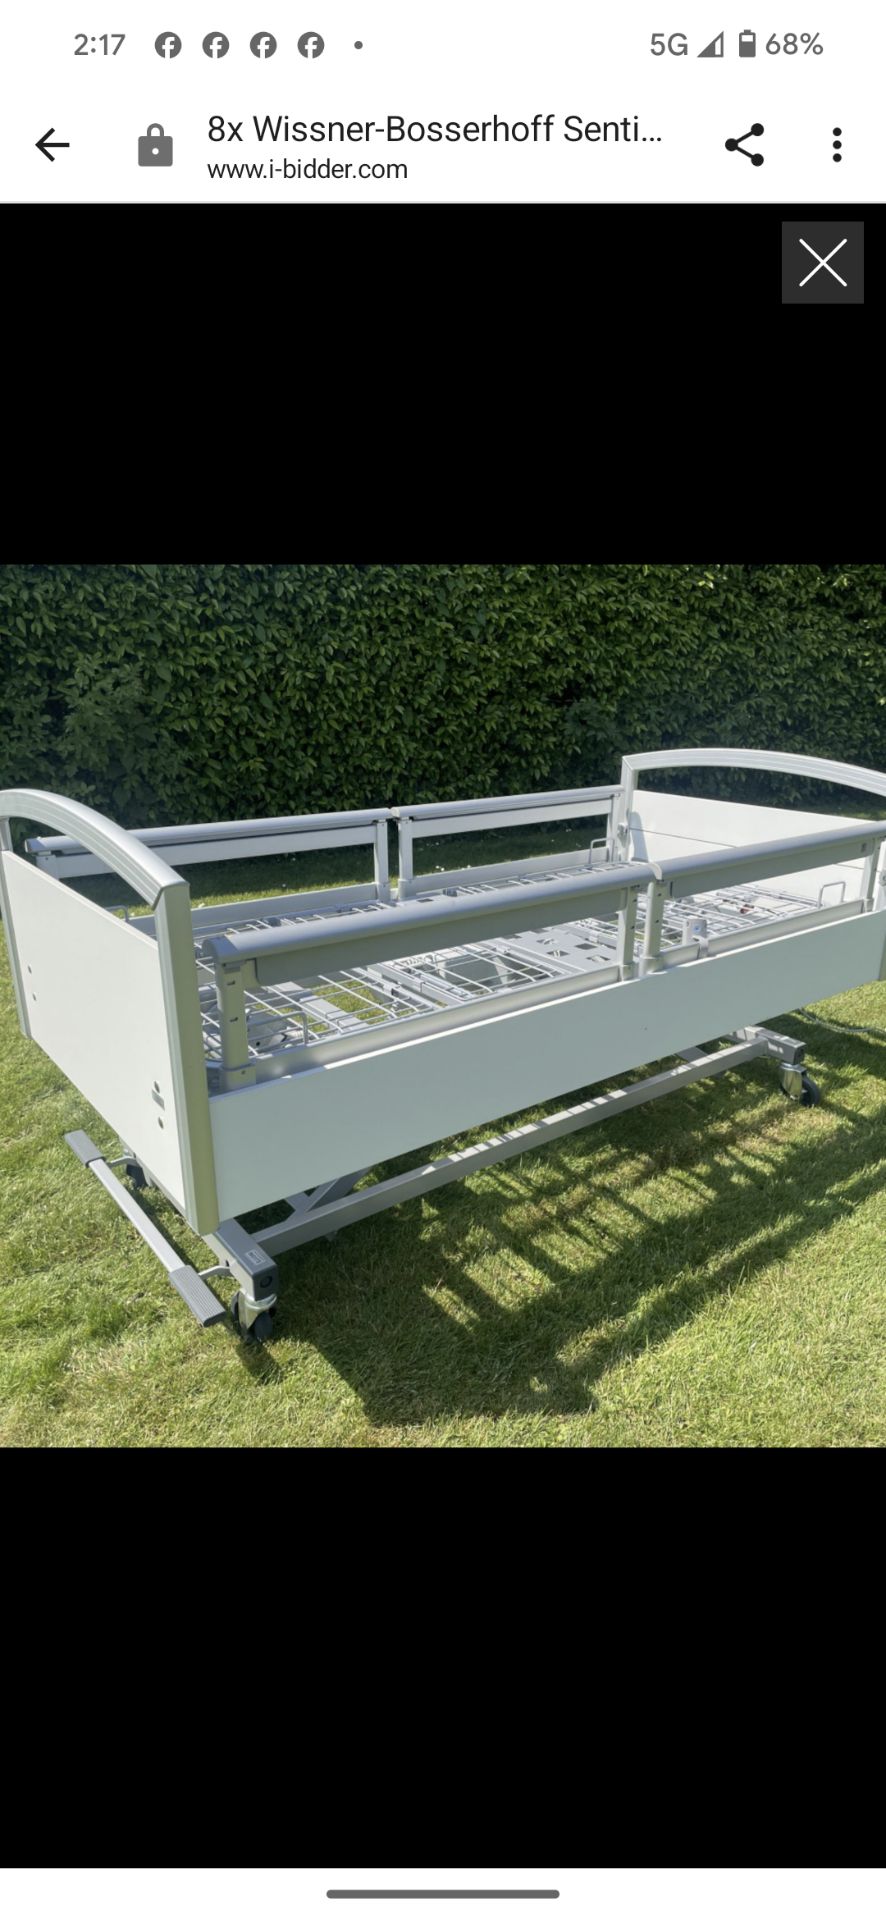 WISSNER BOSSAHOFF SENTIDA 6 ADJUSTABLE ELECTRIC BED WITH ARGYL II DYNAMIC AIRFLOW MATTRESSES - Image 2 of 5